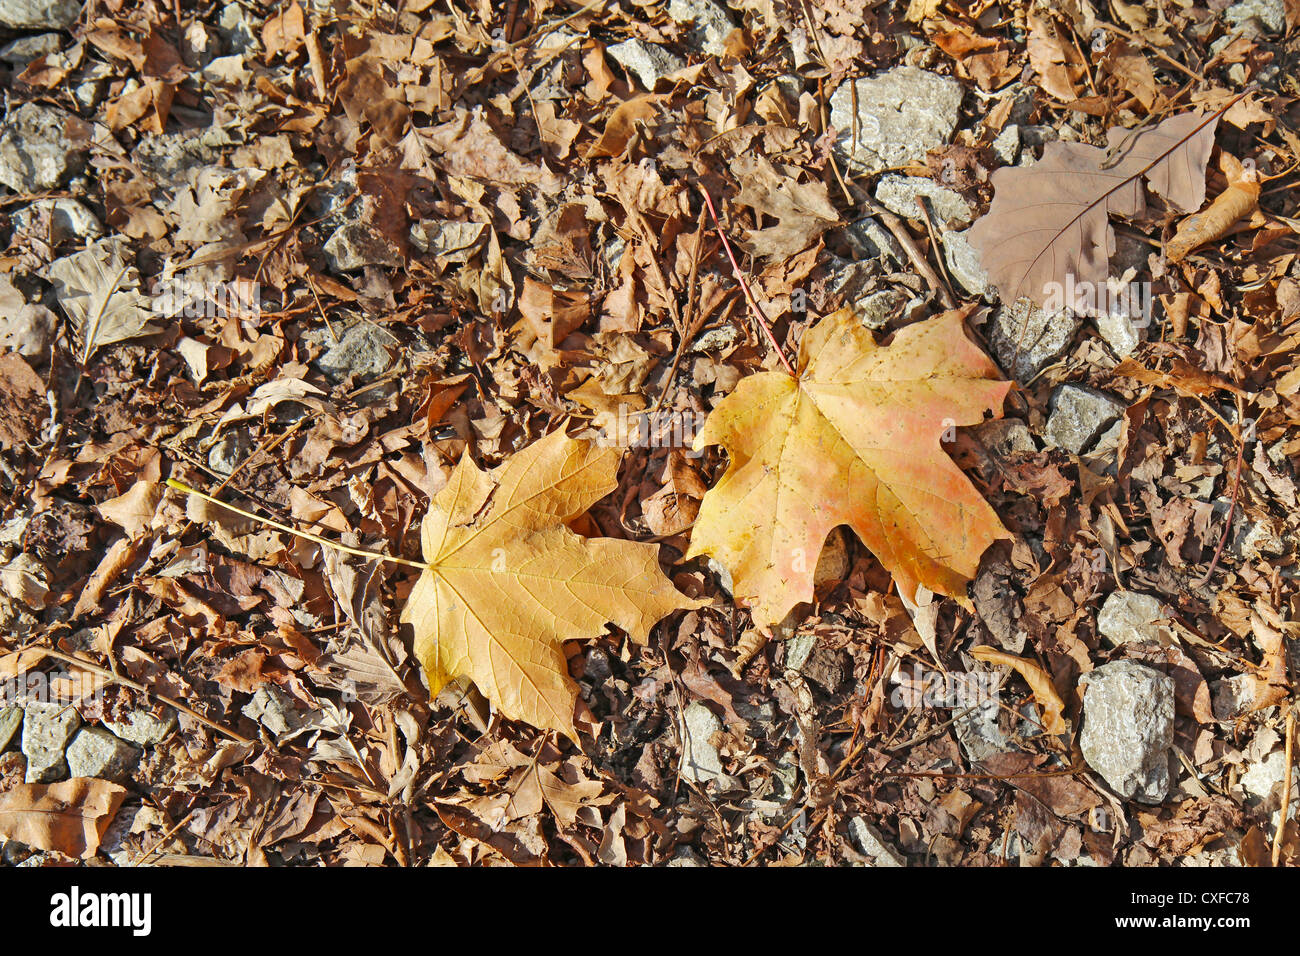 Fallen leaves of red oak (Quercus species) and sugar maple (Acer saccharum) against a background of leaf litter and rocks Stock Photo